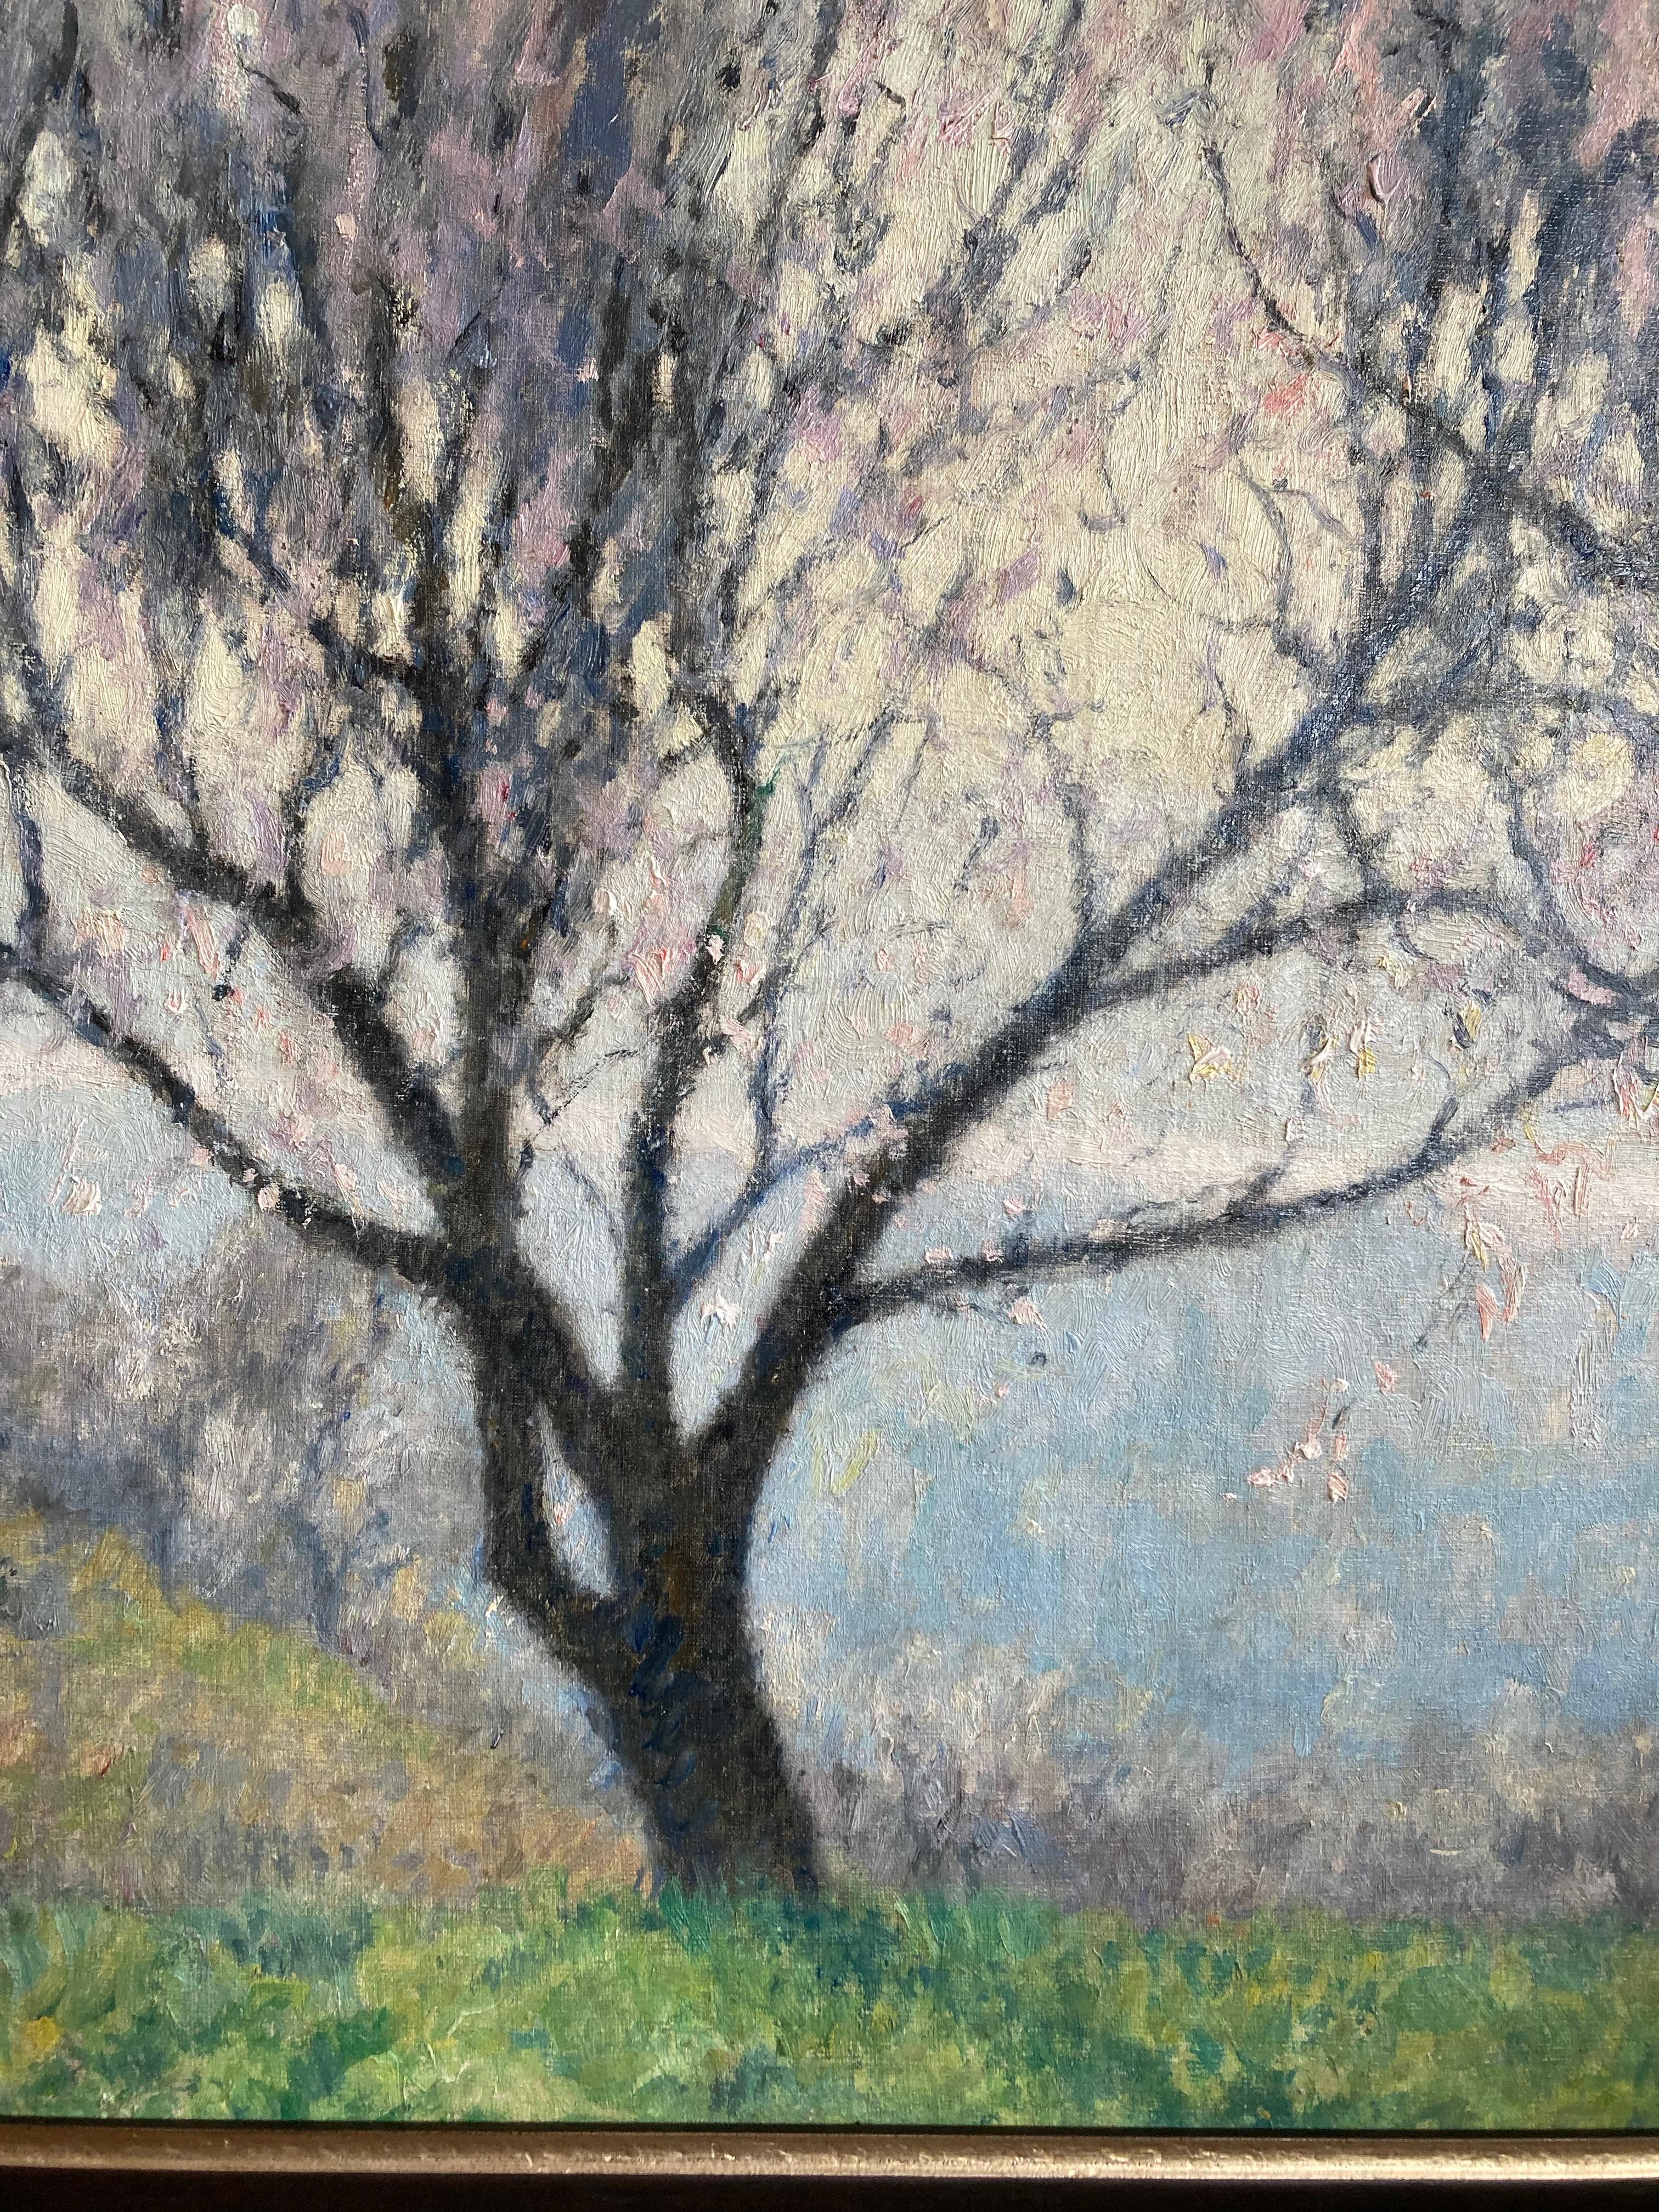 Painted from a high vantage point on the banks of the Seine and peering though a curtain of cherry blossom, this dream like vista captures the hazy light of a spring morning.  A beautiful image in very good original condition.

Raymond Thibésart